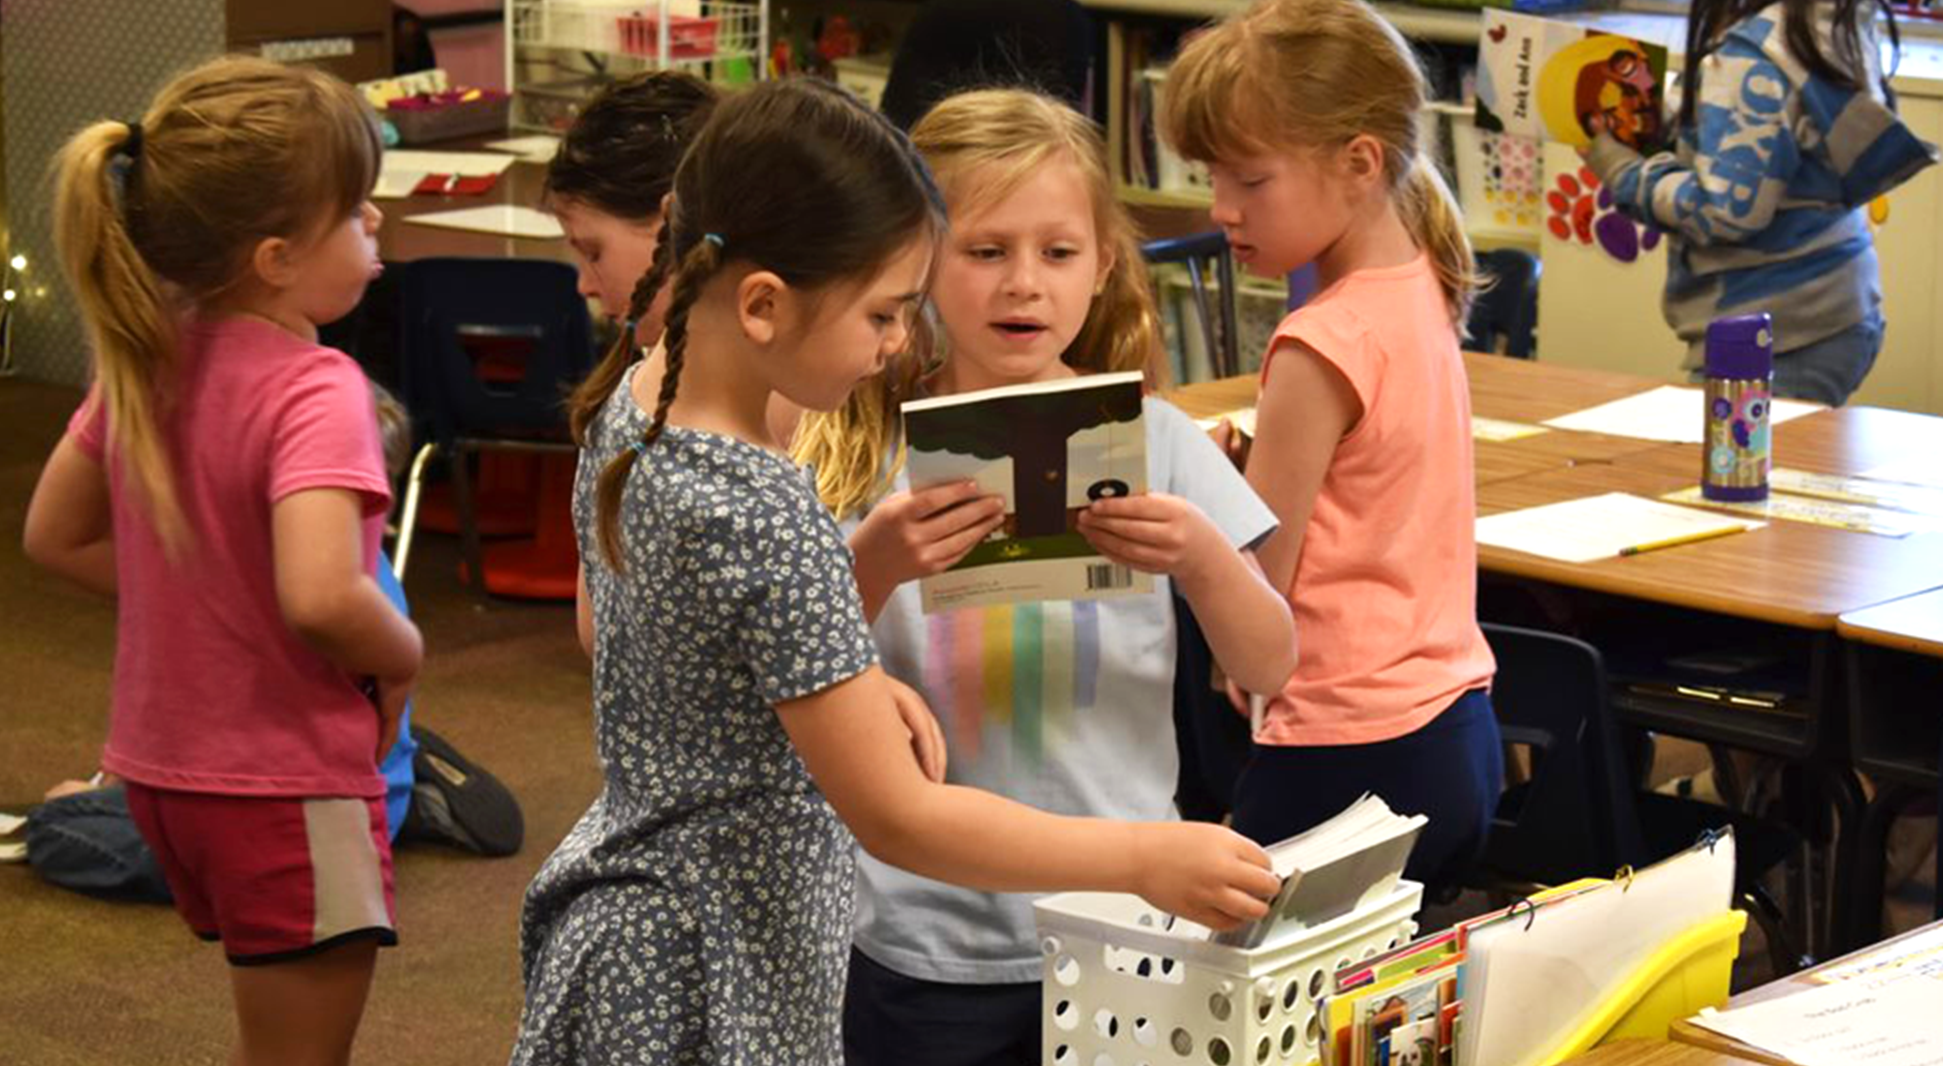 Two kindergarten students select picture books from a white crate. Other students are present in the background. Collins wears a blue dress and has dark brown braids.